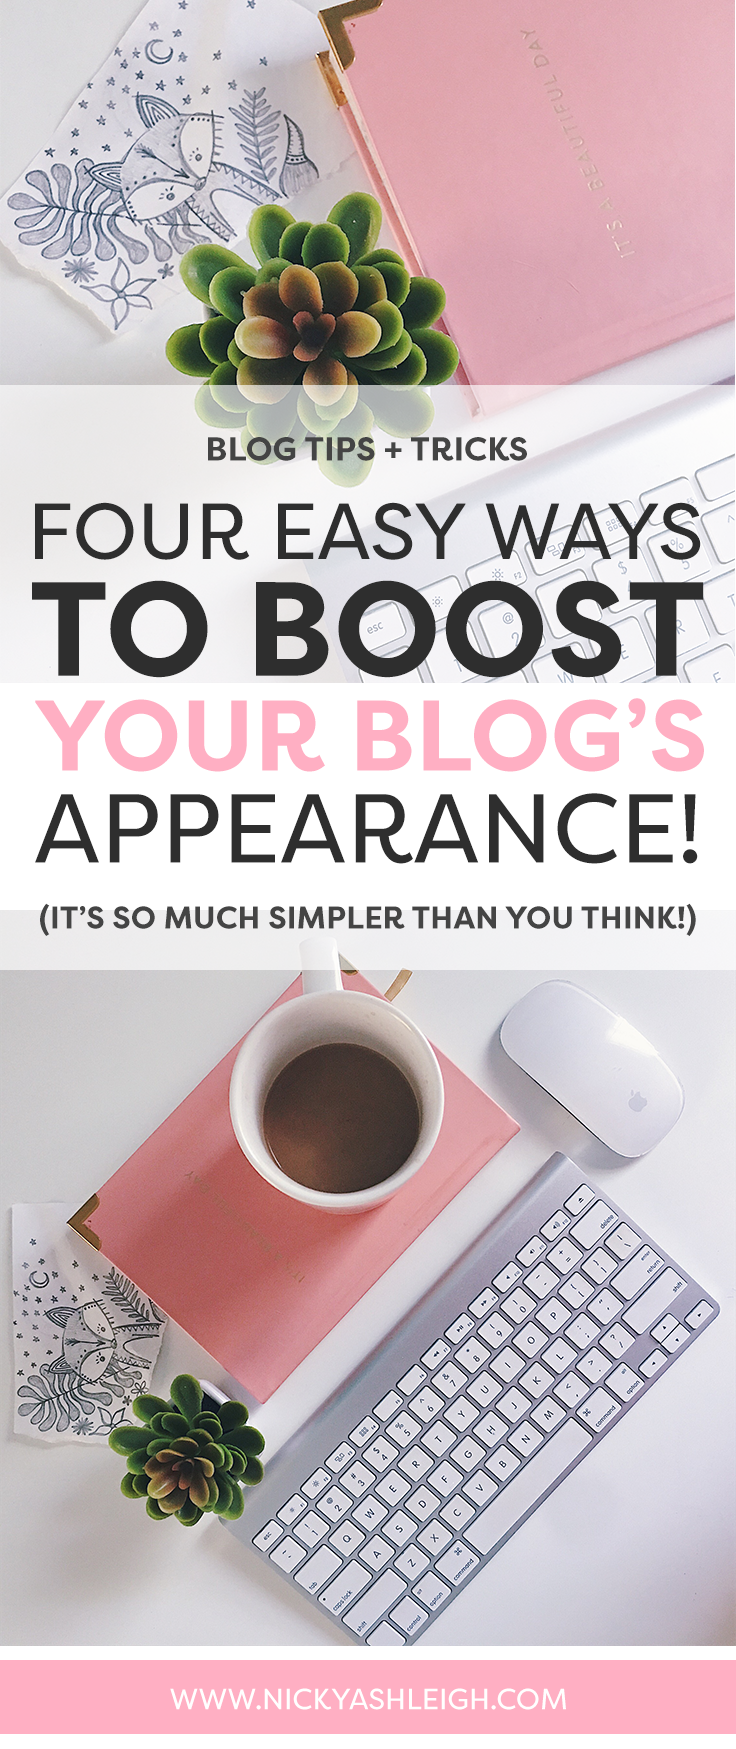 Four Easy Ways to Boost Your Blog's Appearance nickyashleigh